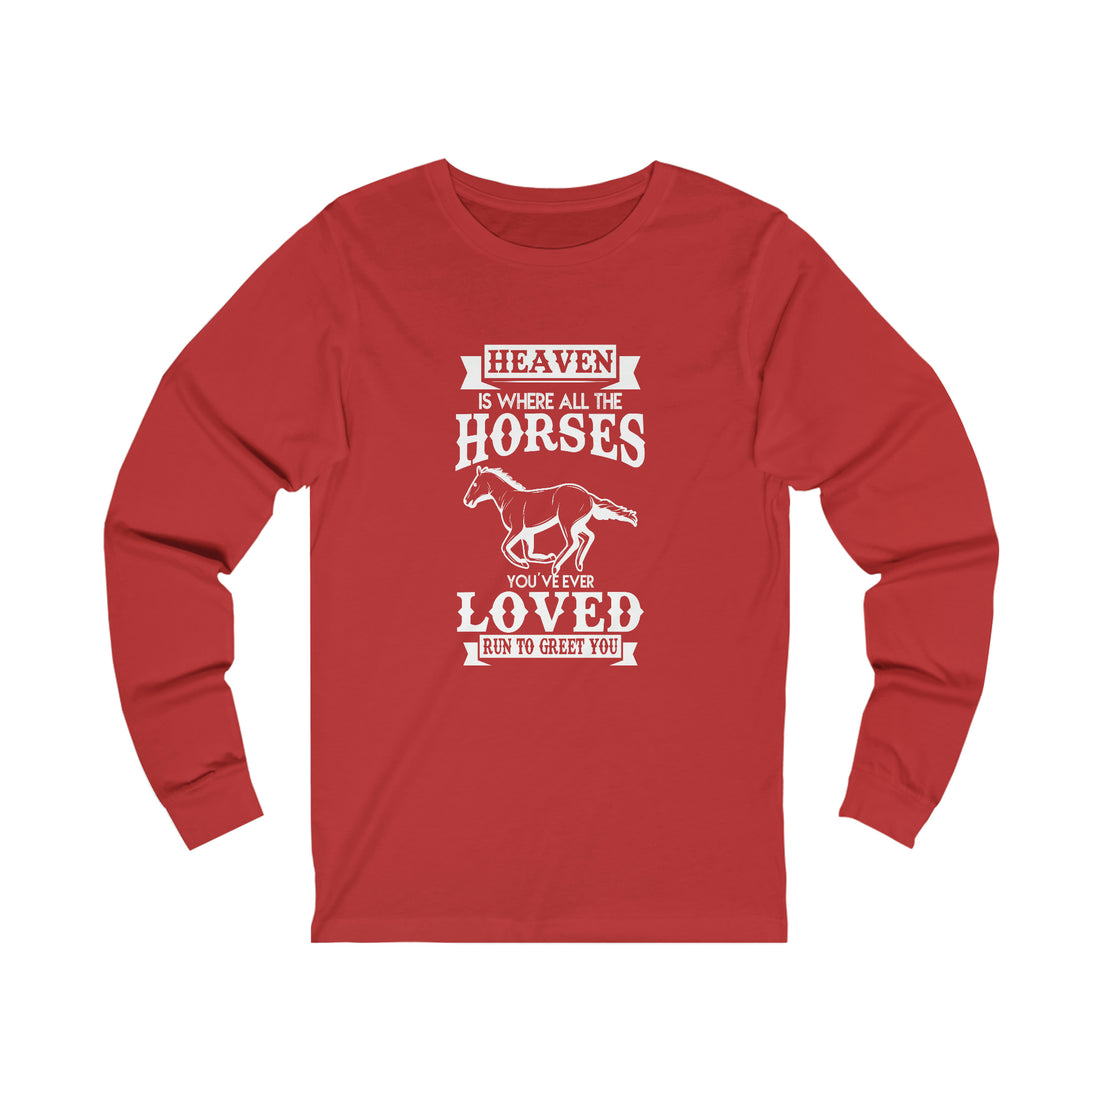 Heaven Is Where All The Horses You Have Ever Loved Join To Greet You - Unisex Jersey Long Sleeve Tee